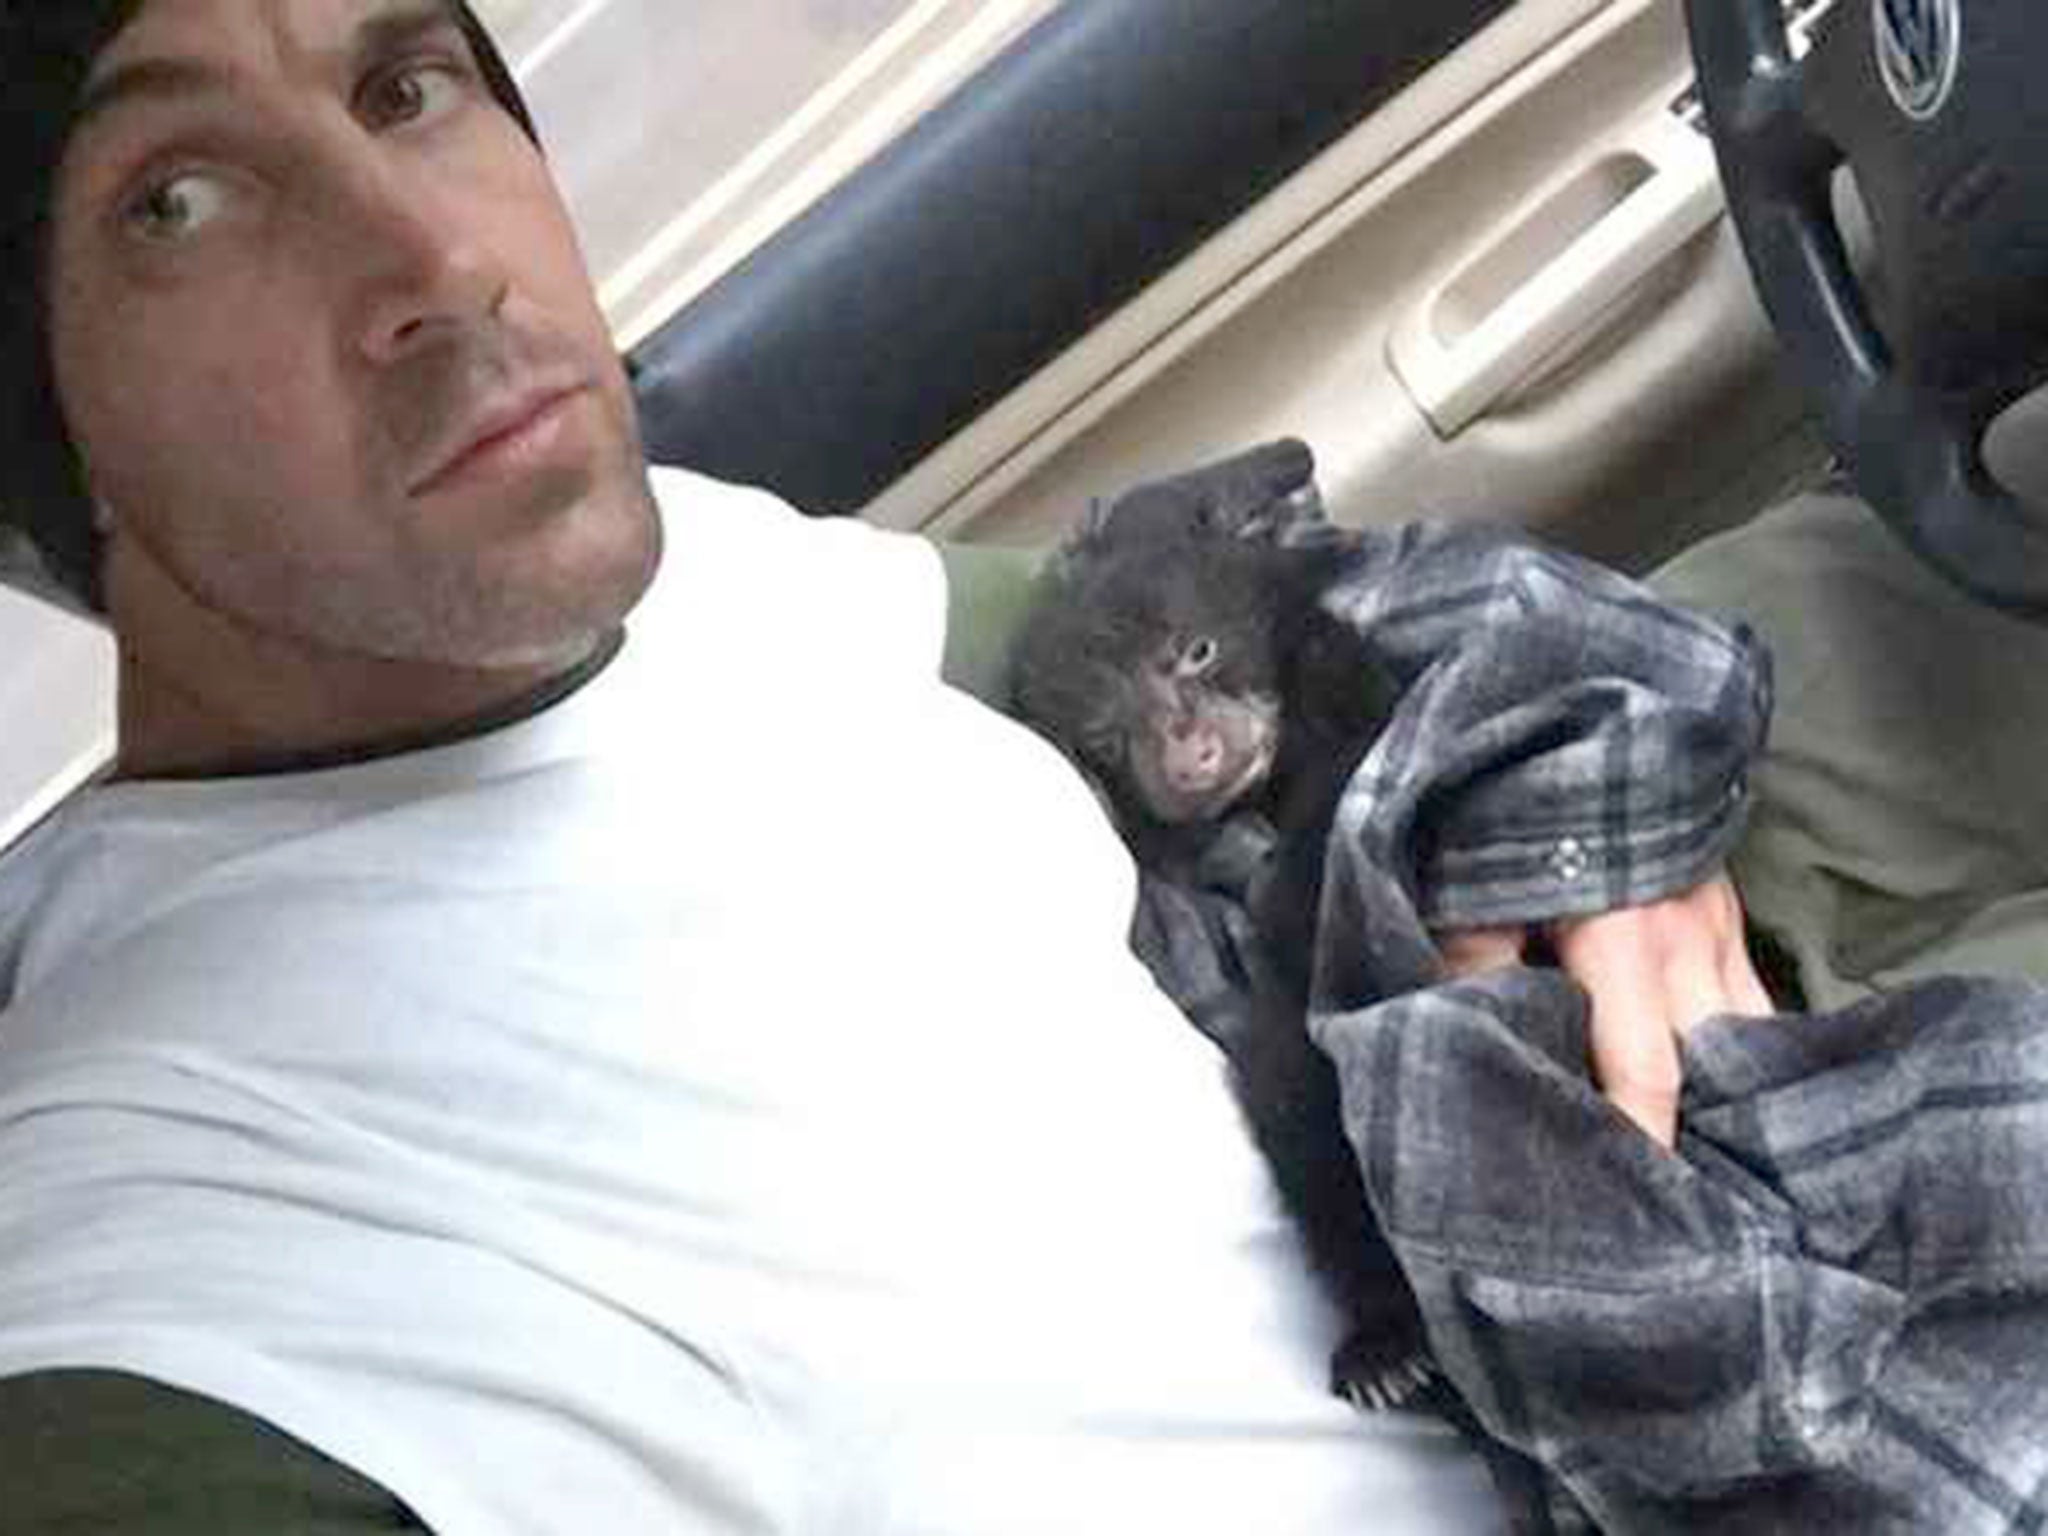 Man risks his life to save bear cub | The Independent | The Independent